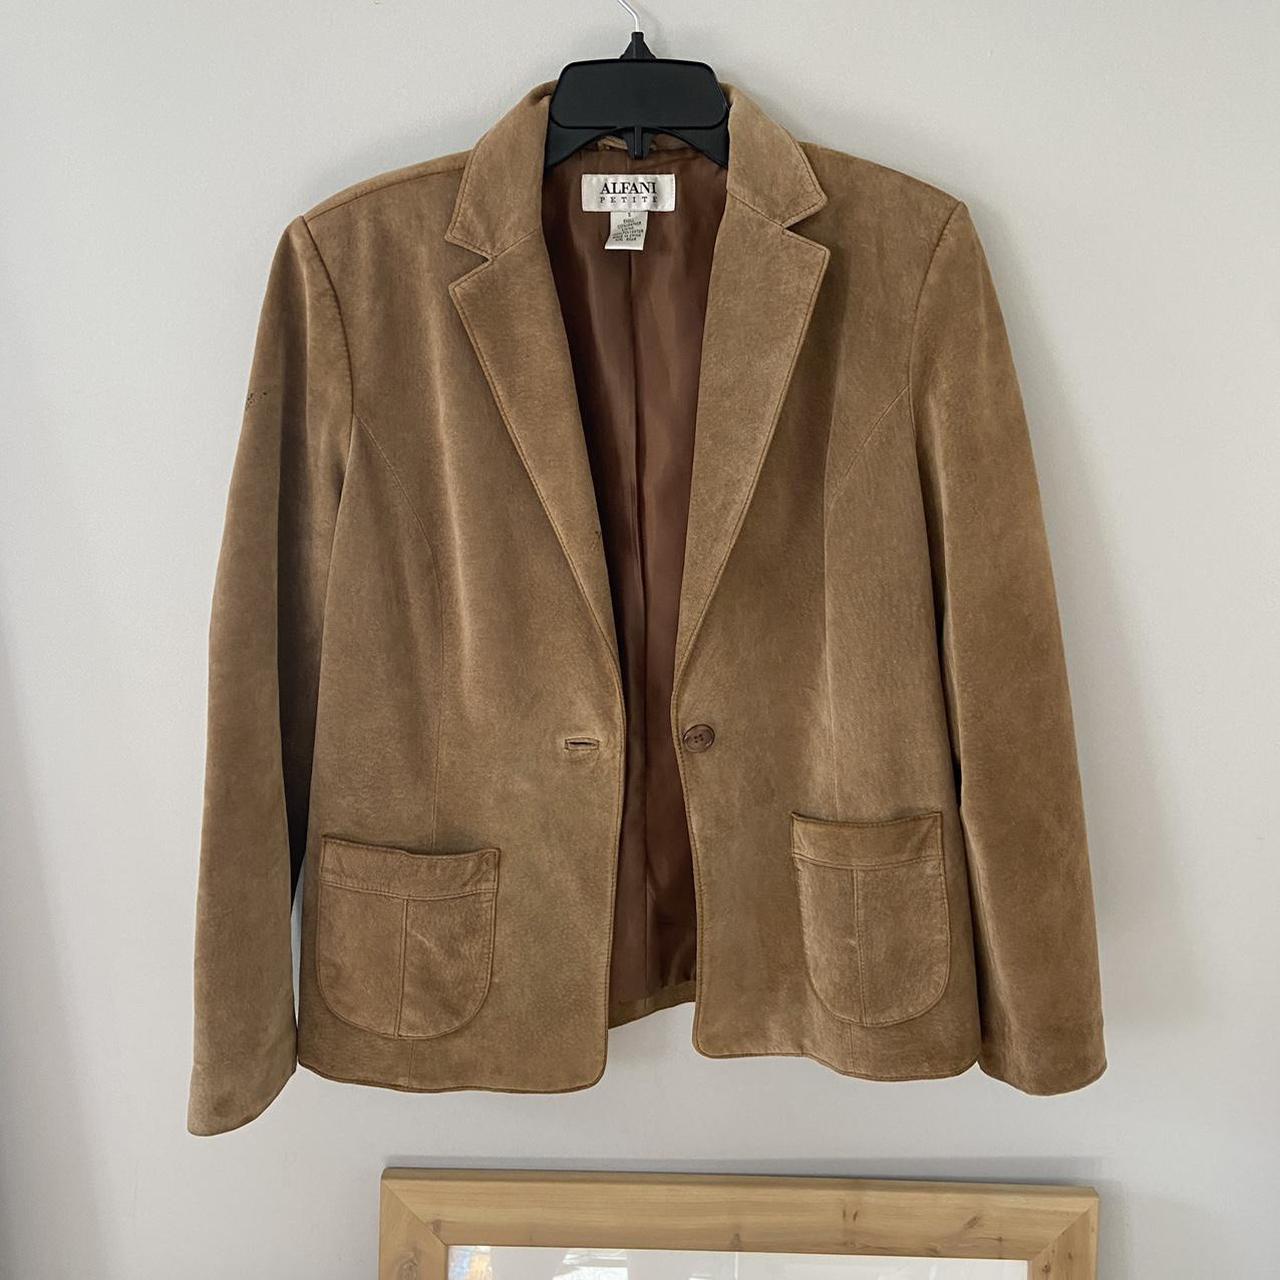 Women's Brown and Tan Jacket